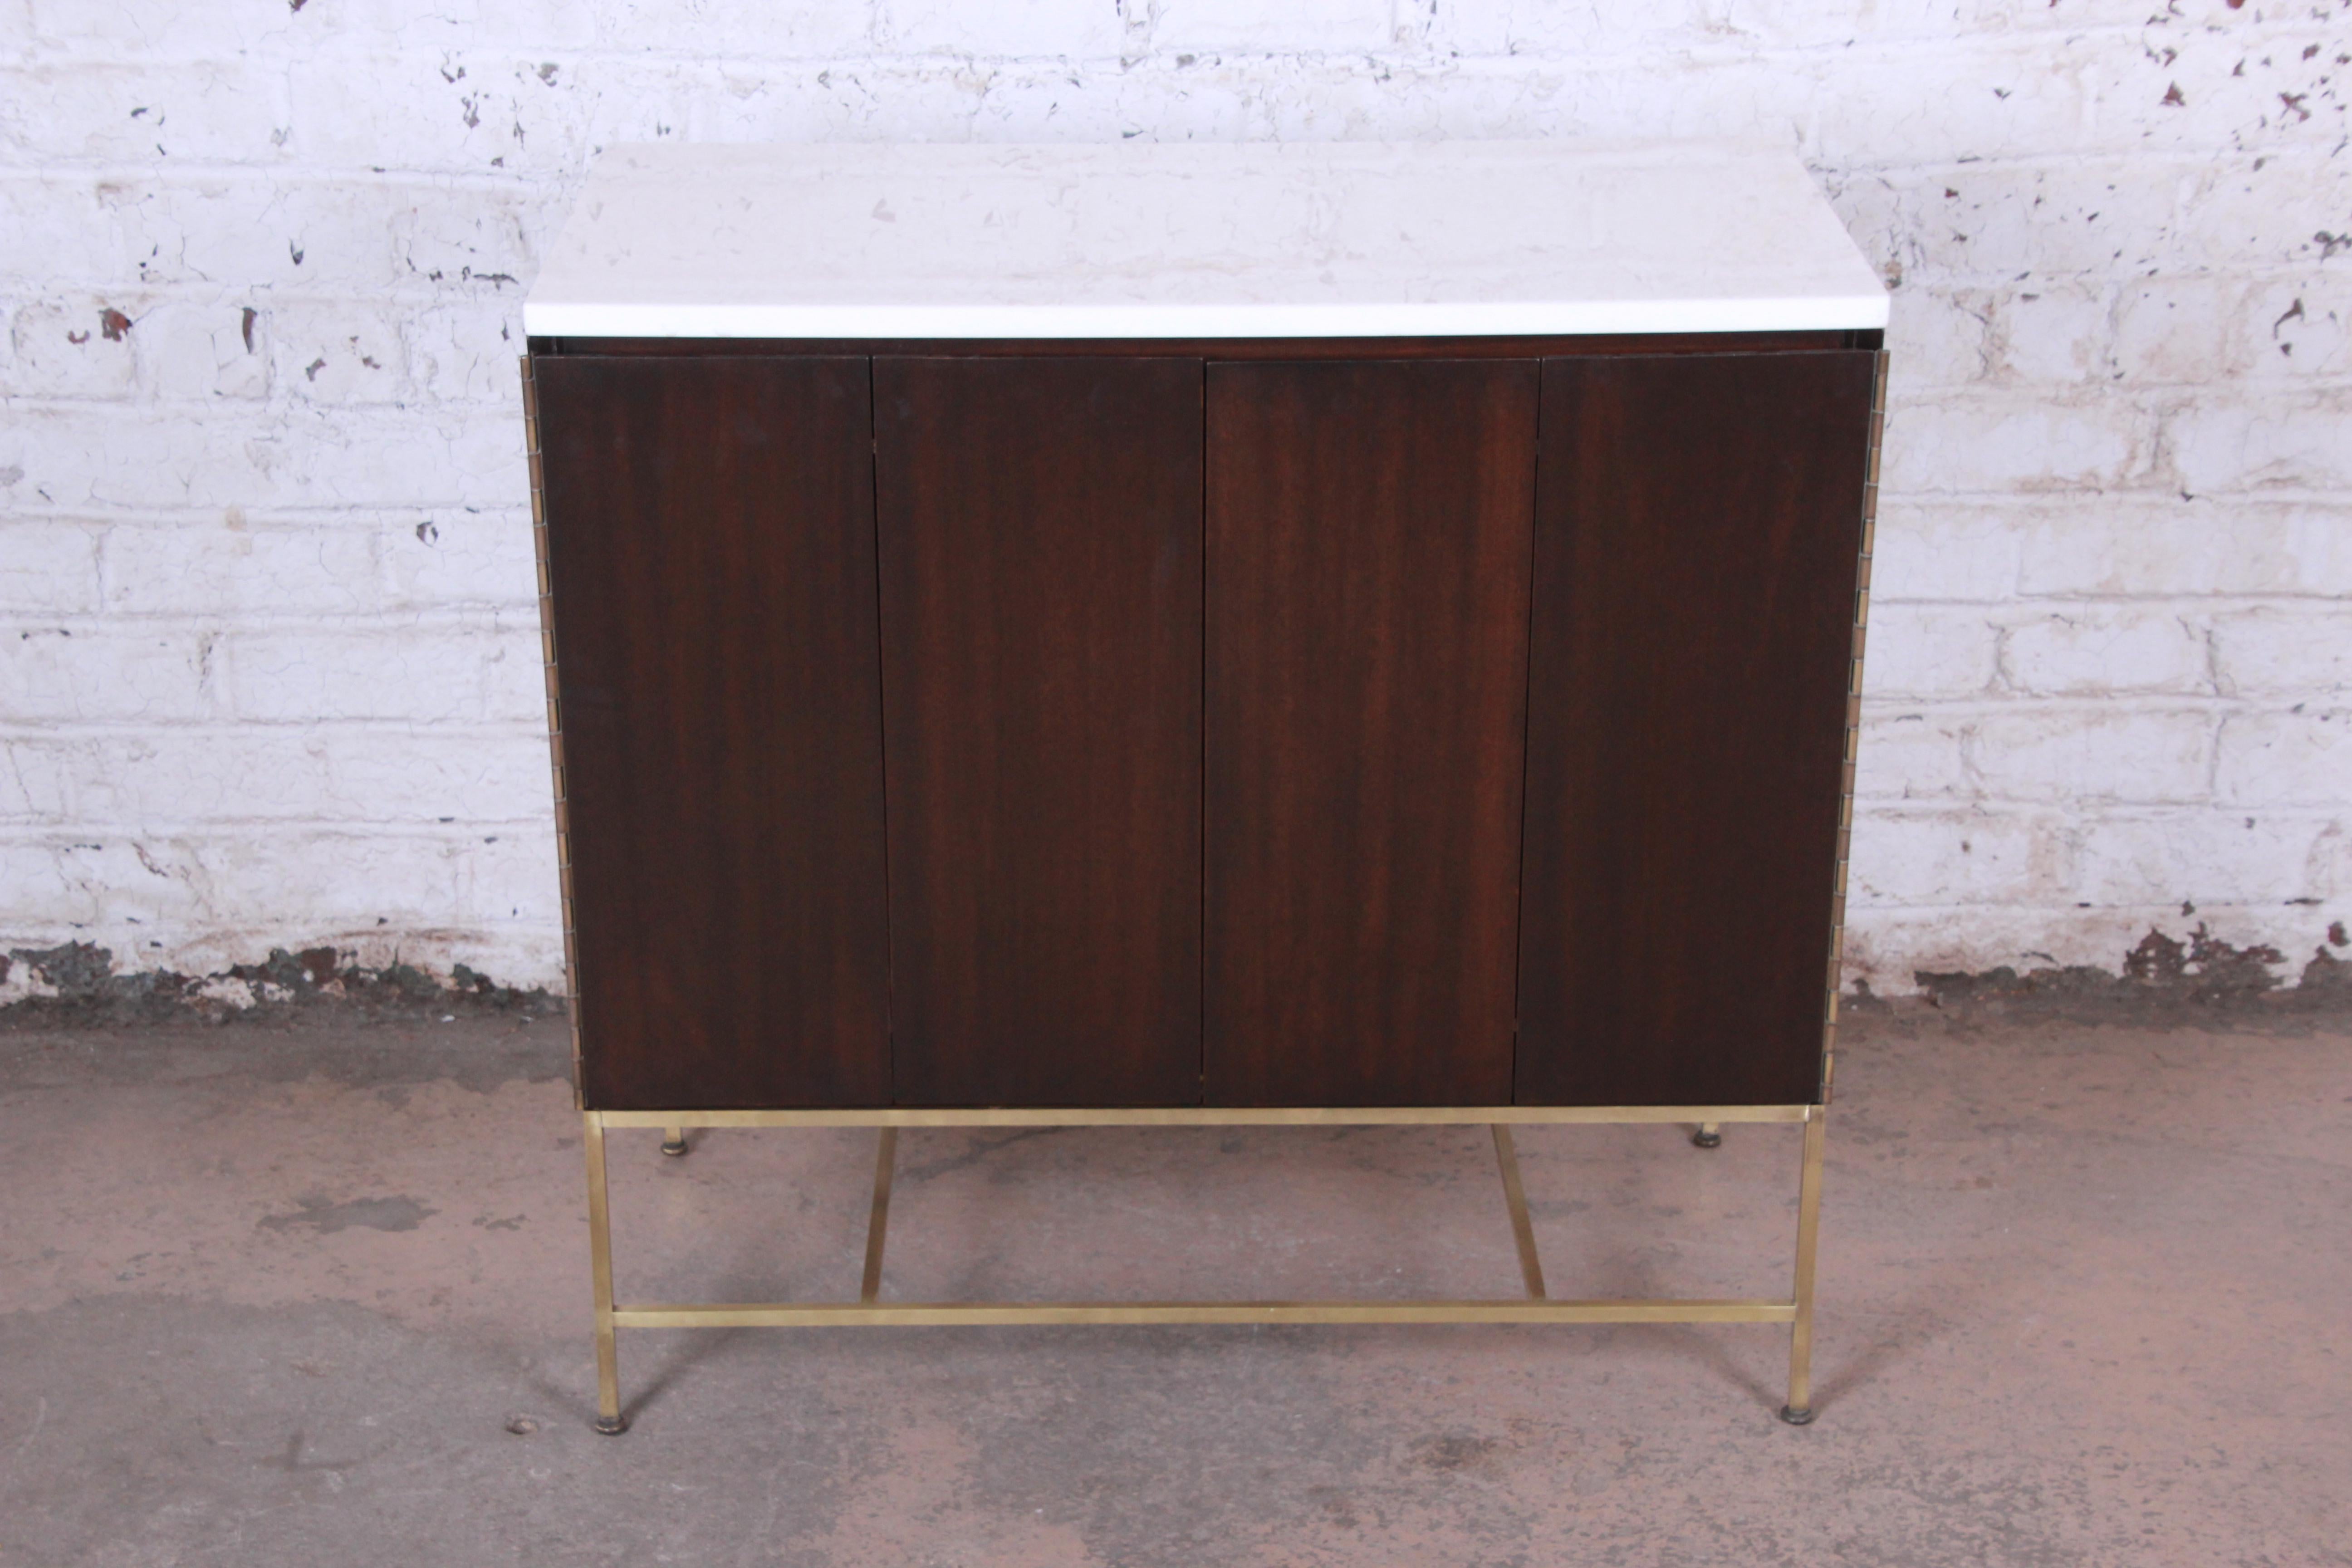 Offering an exceptional Mid-Century Modern sideboard credenza or cabinet designed by Paul McCobb for his Irwin Collection for Calvin Furniture. The credenza features gorgeous mahogany wood grain, with an original brass base and white vitrolite top.